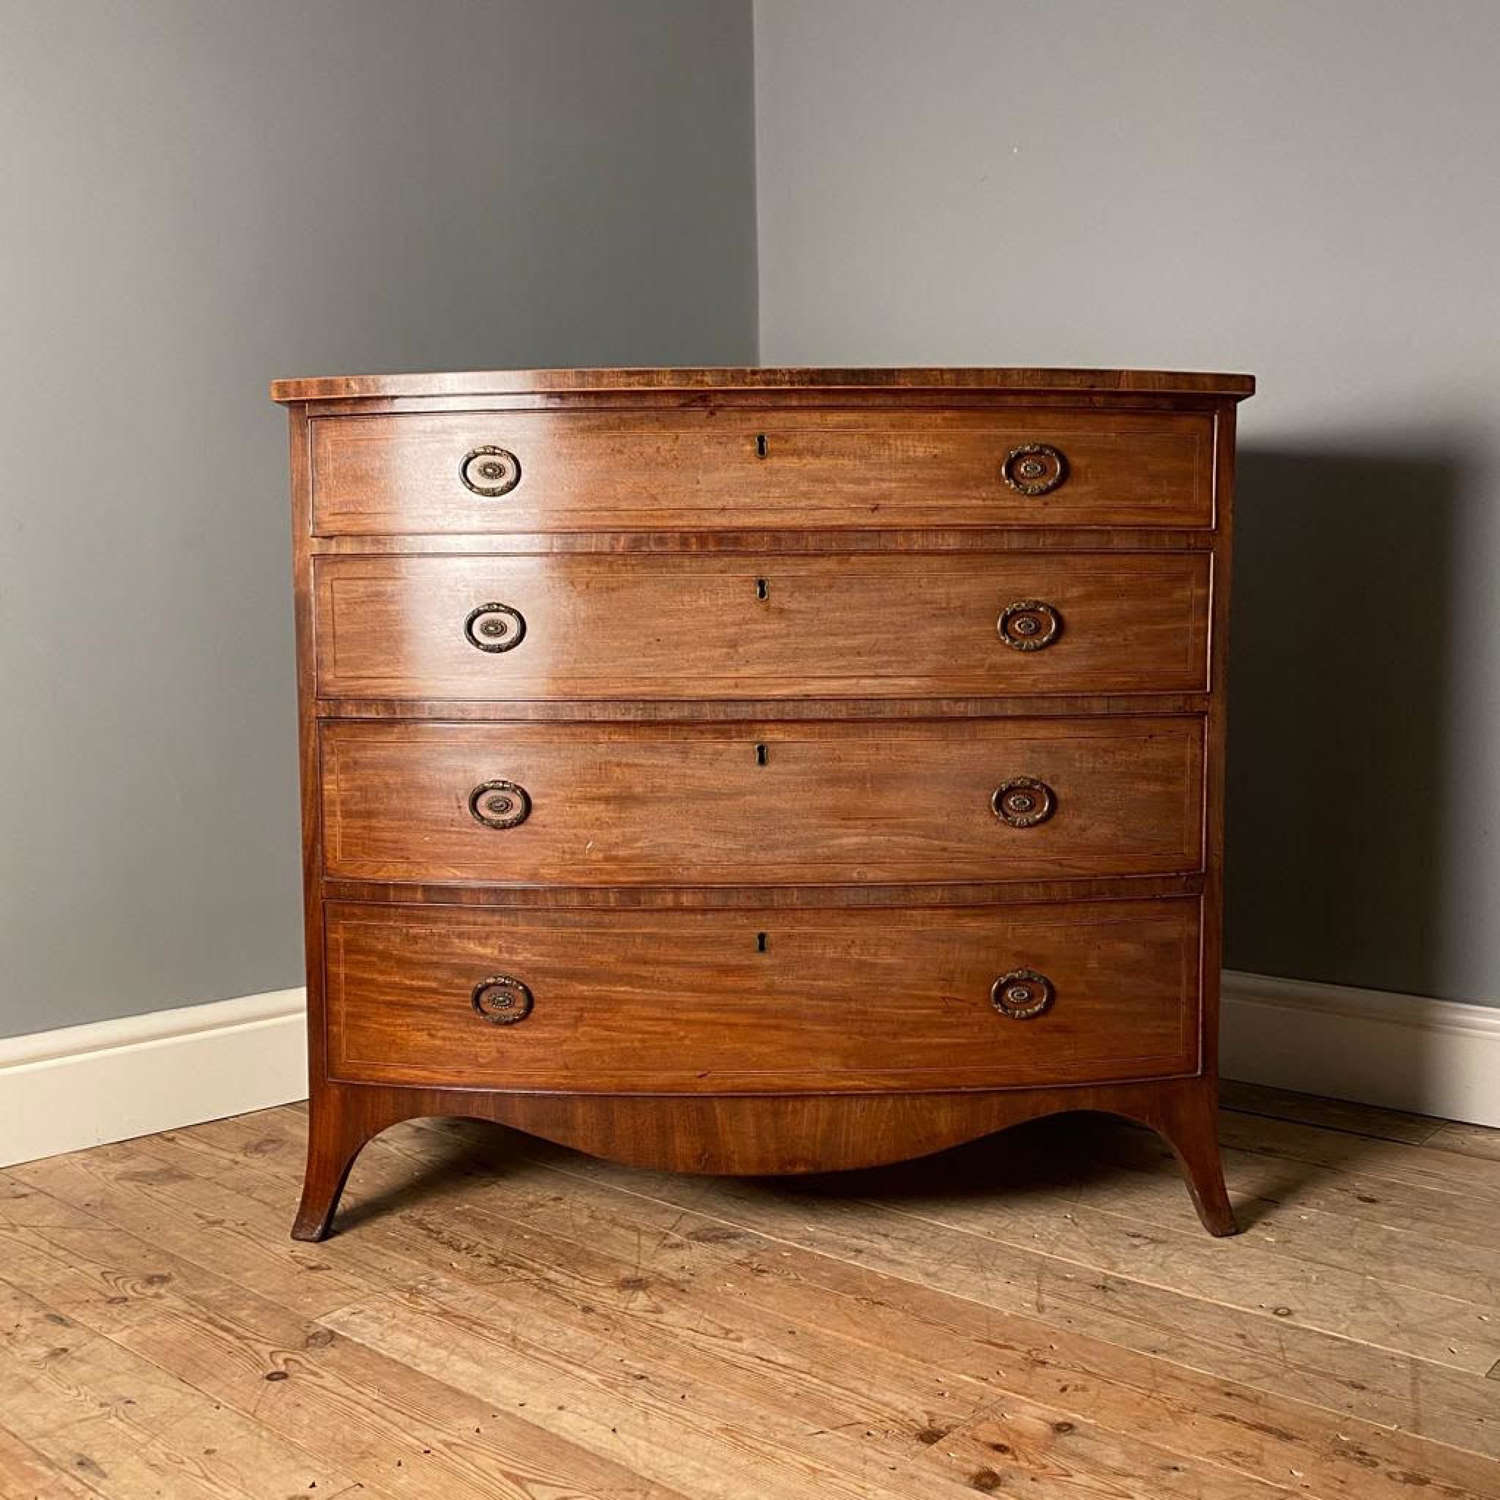 Beautiful Gillows Mahogany Bowfront Chest of Drawers